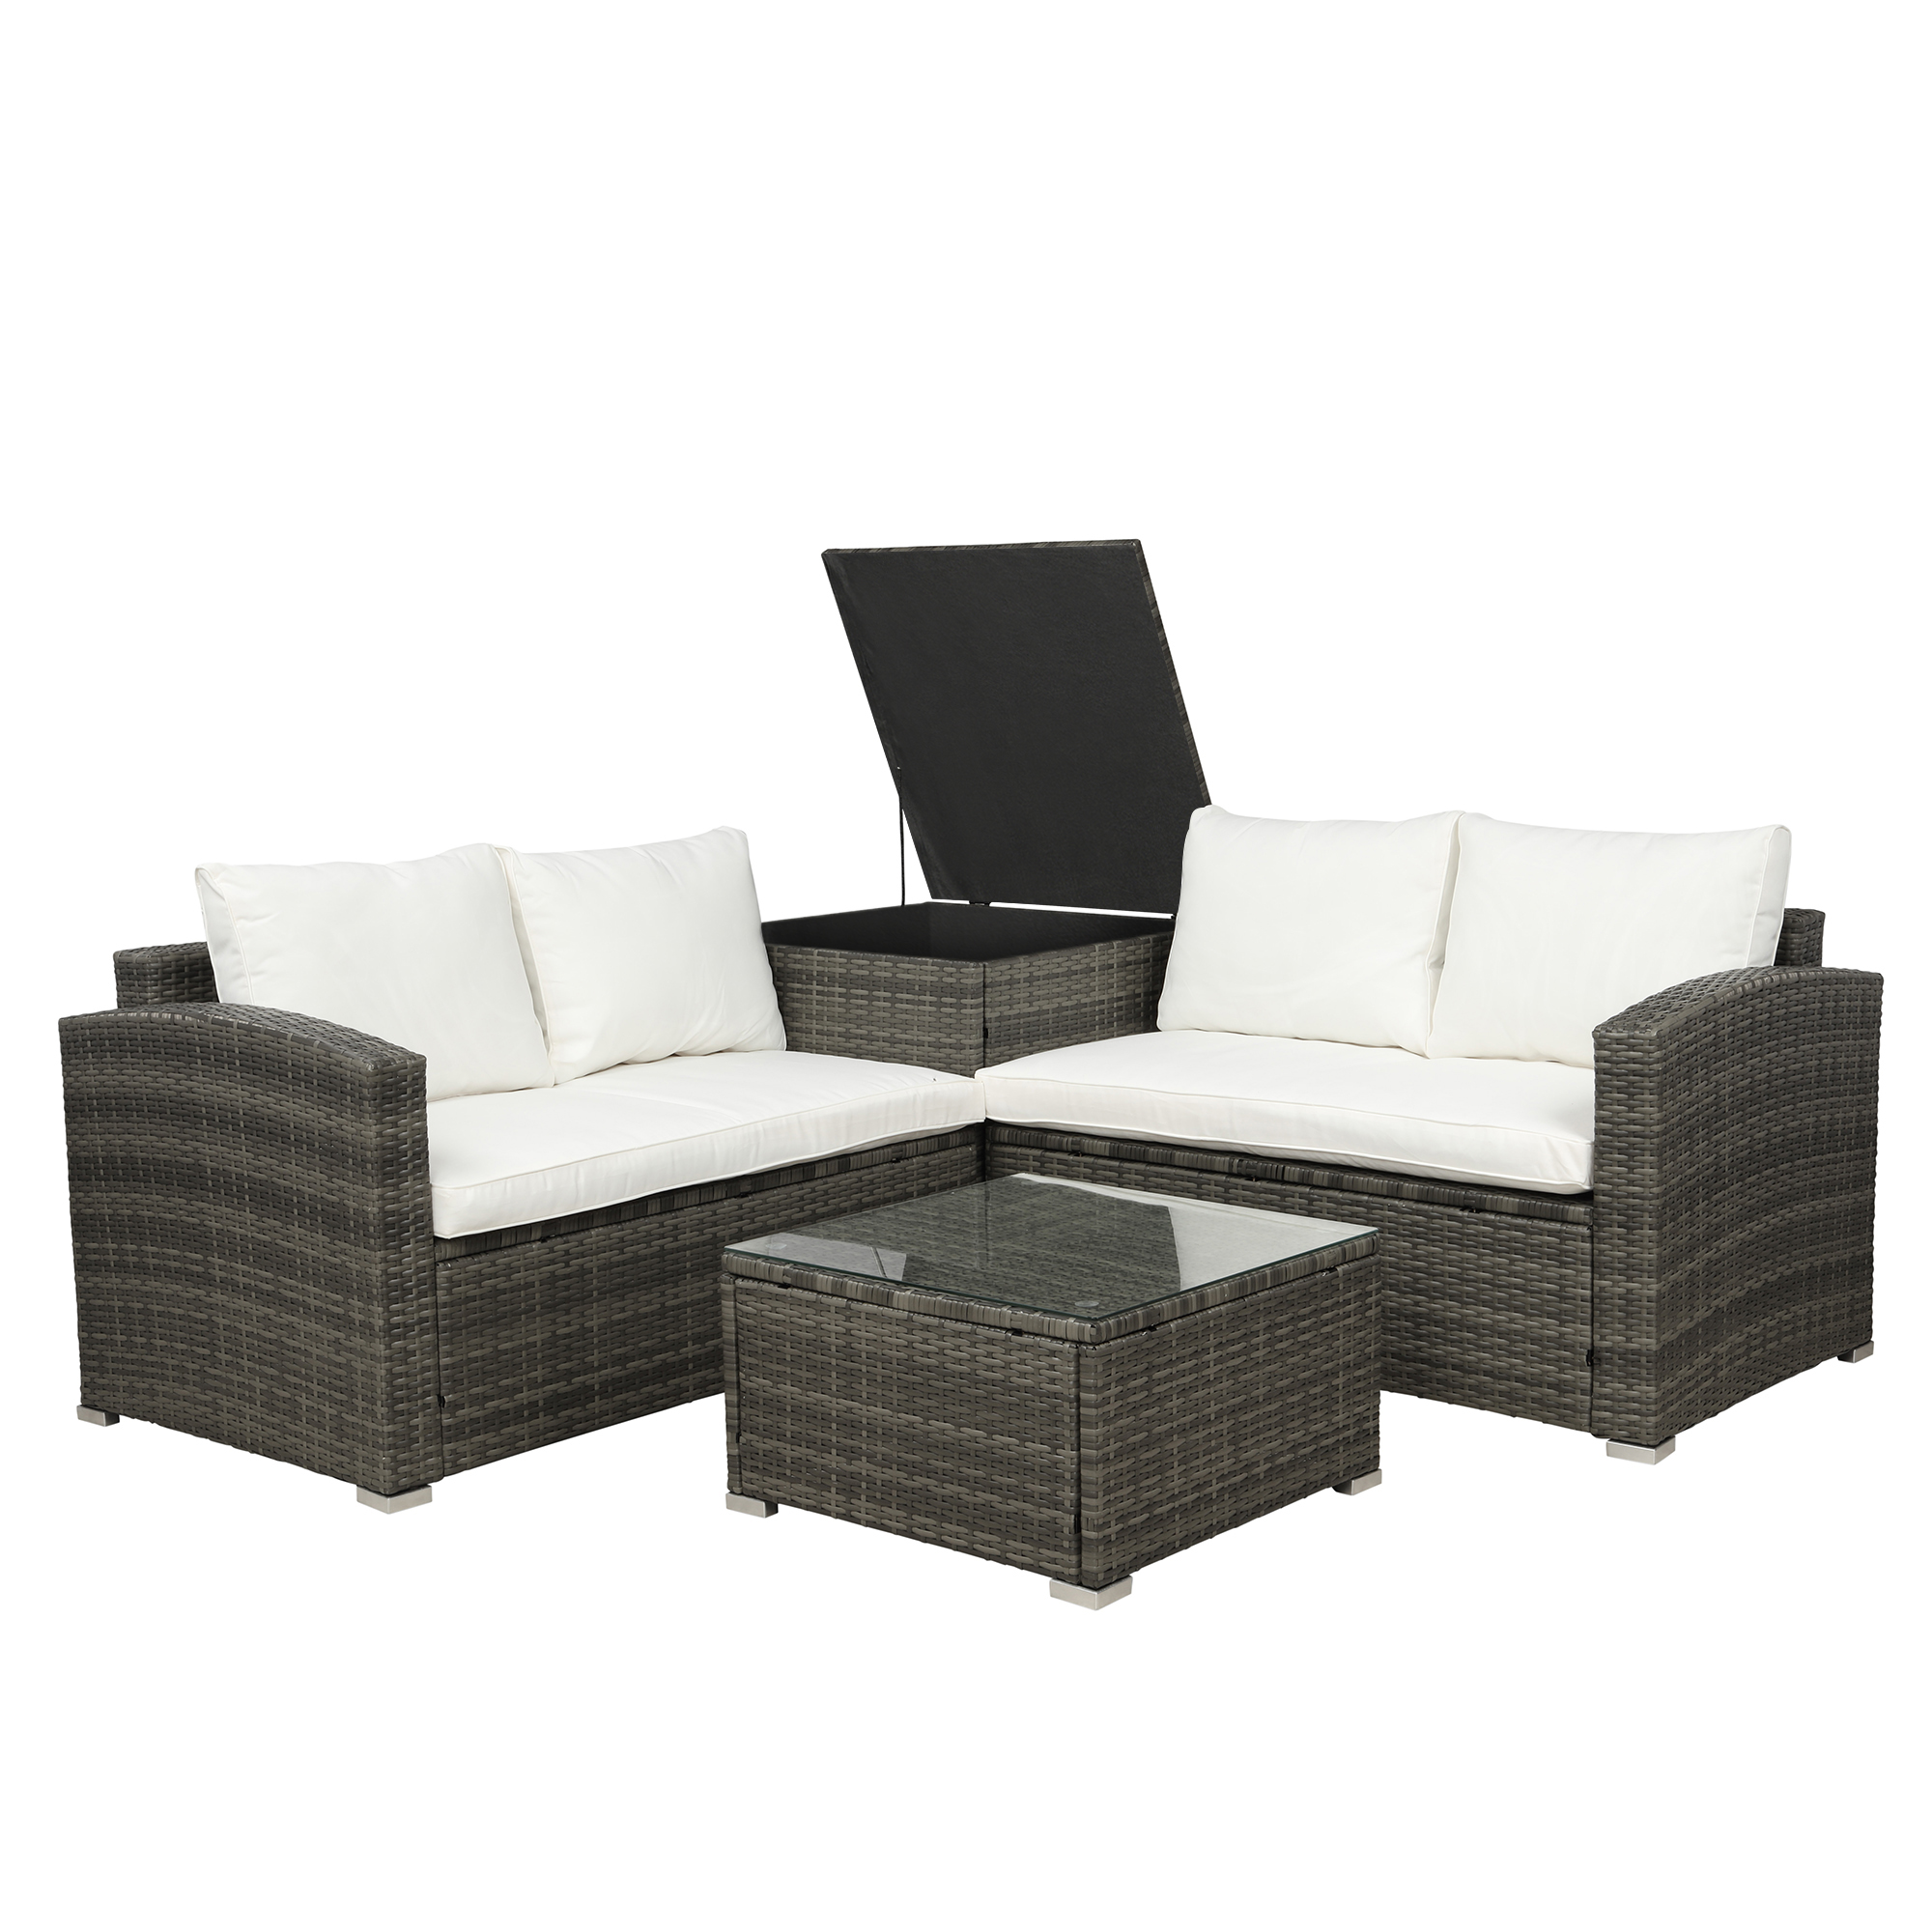 Outdoor Patio Deck Table and Chairs Sets, 4-Piece Wicker Sofa Patio Conversation Furniture Set w/ L-Seats Sofa, R-Seats Sofa, Cushion box, Tempered Glass Dining Table, Padded Cushions, Beige, S13115 - image 1 of 7